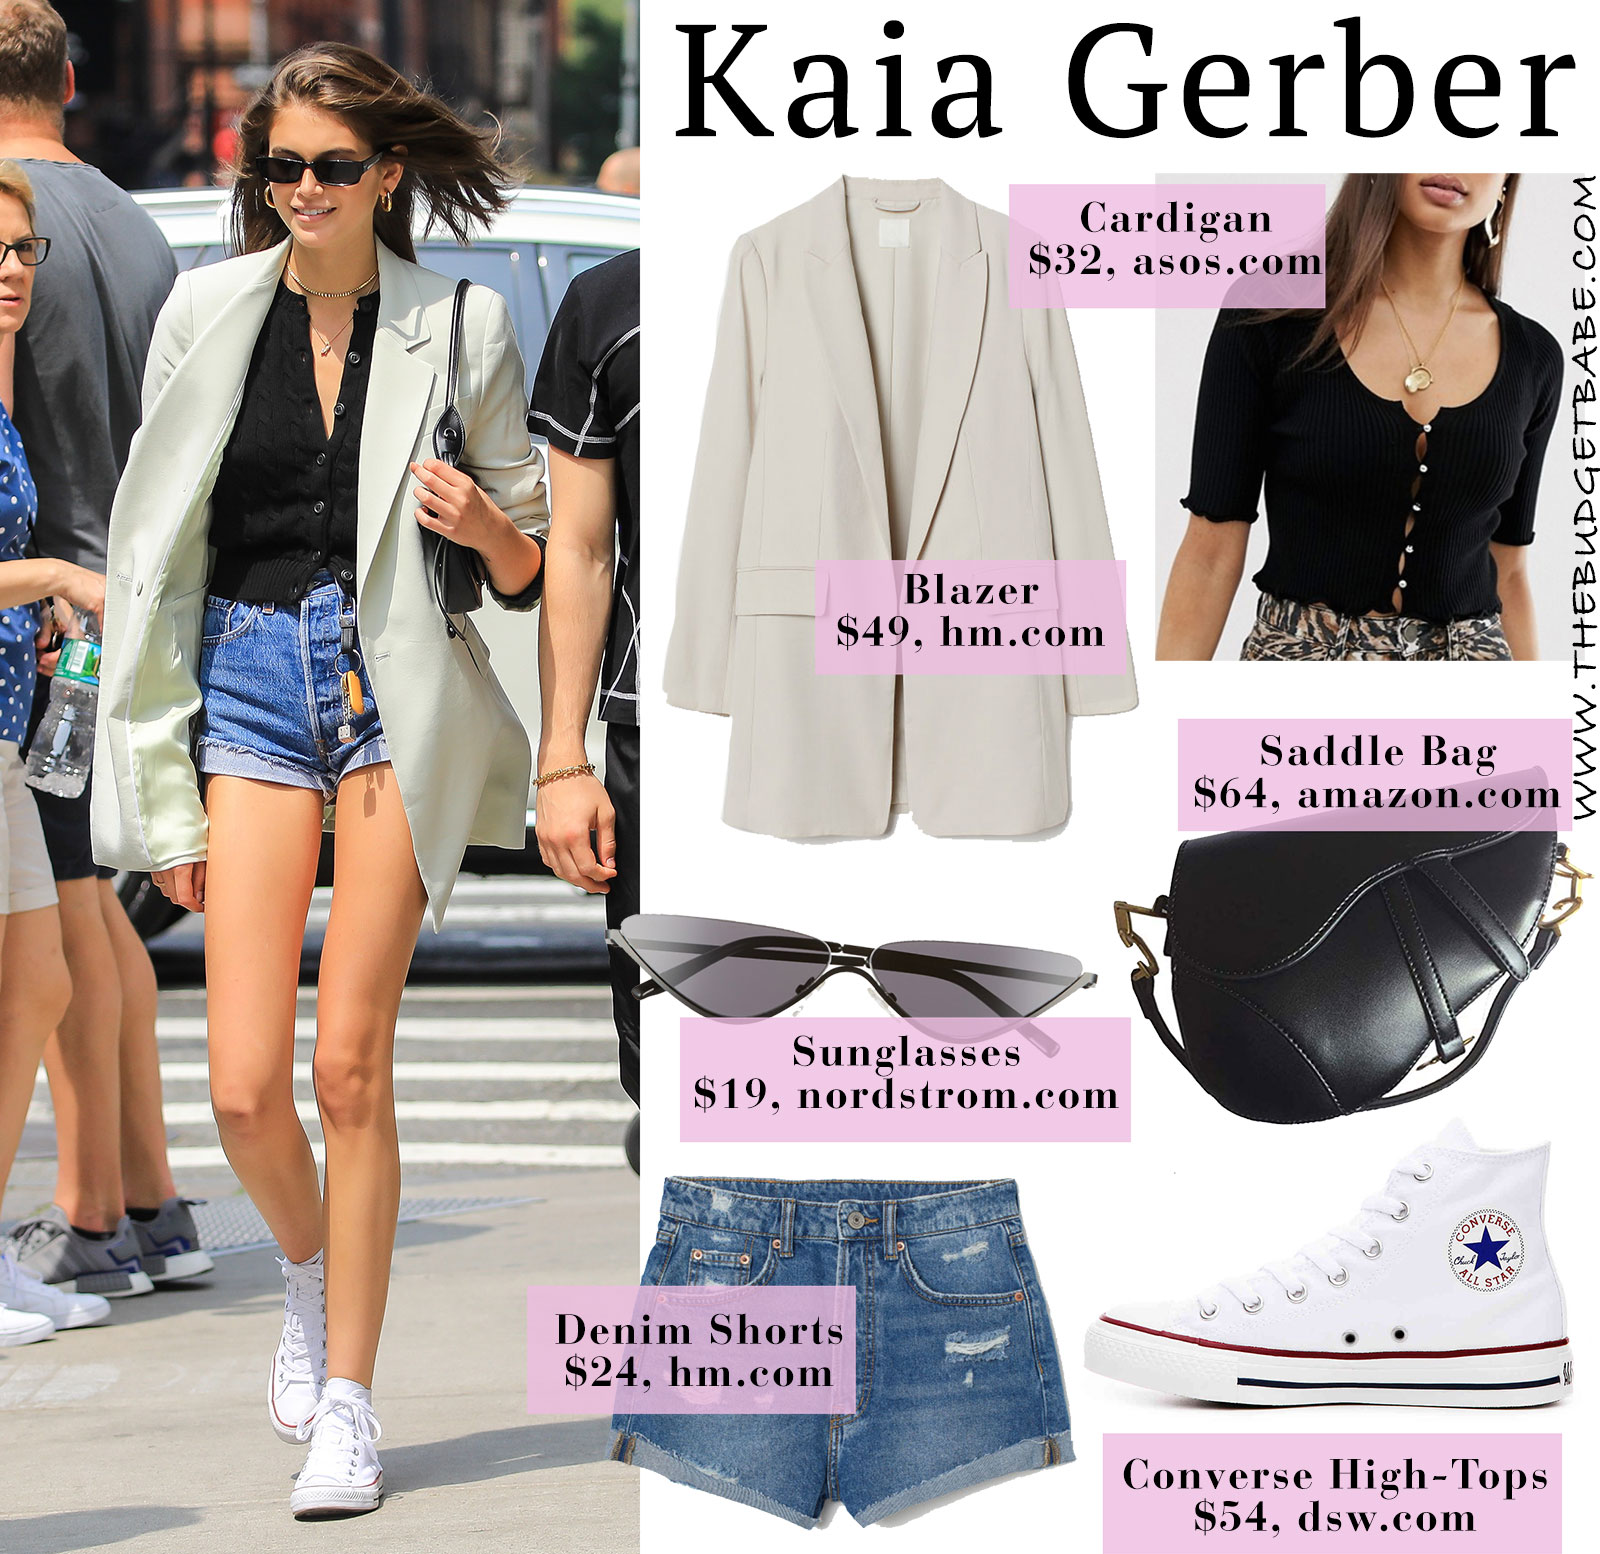 Kaia Gerber inspired streetstyle for summer with tan blazer, Converse and cut-offs